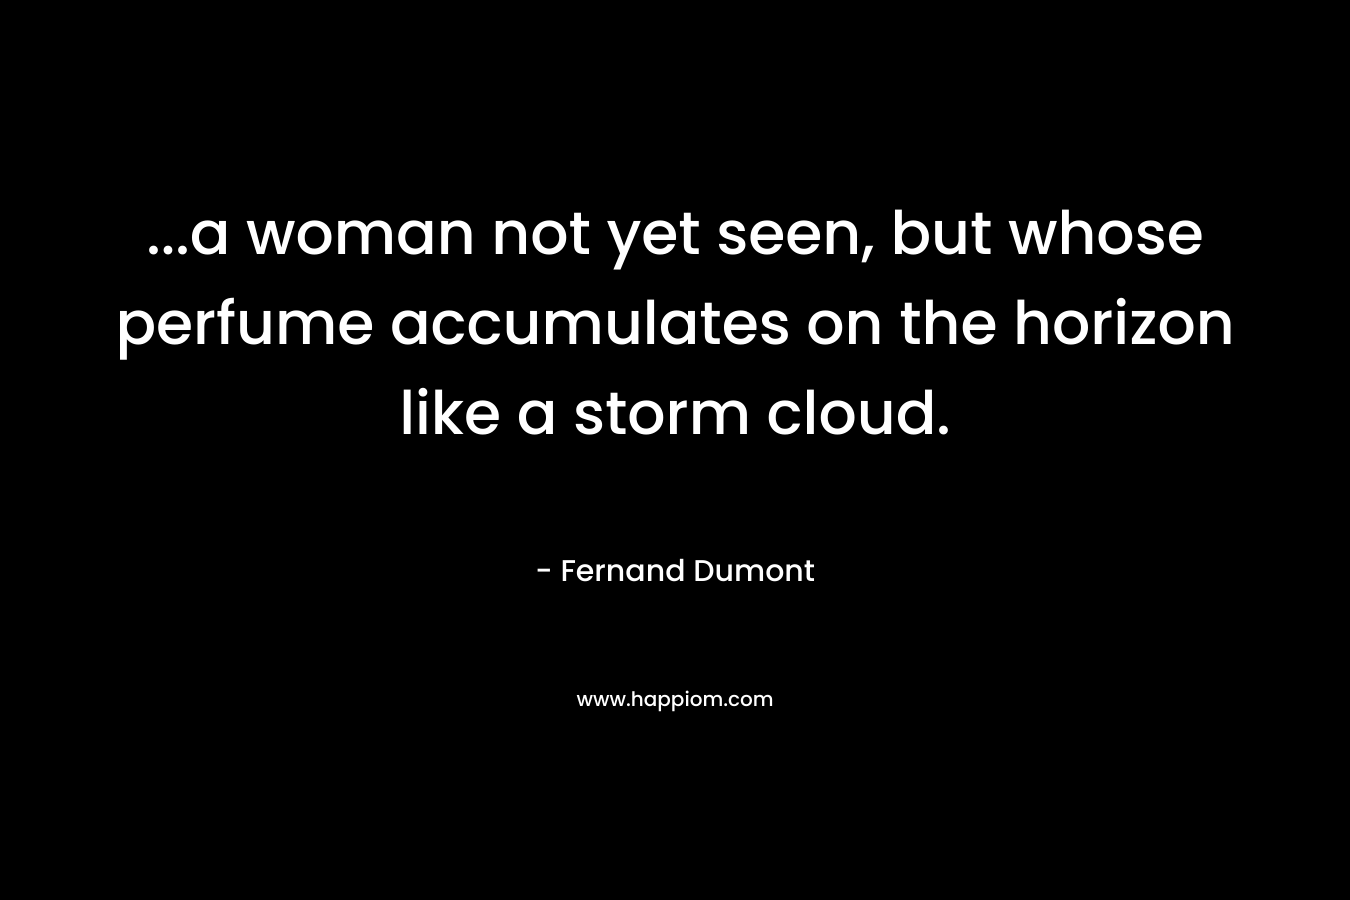 …a woman not yet seen, but whose perfume accumulates on the horizon like a storm cloud. – Fernand Dumont